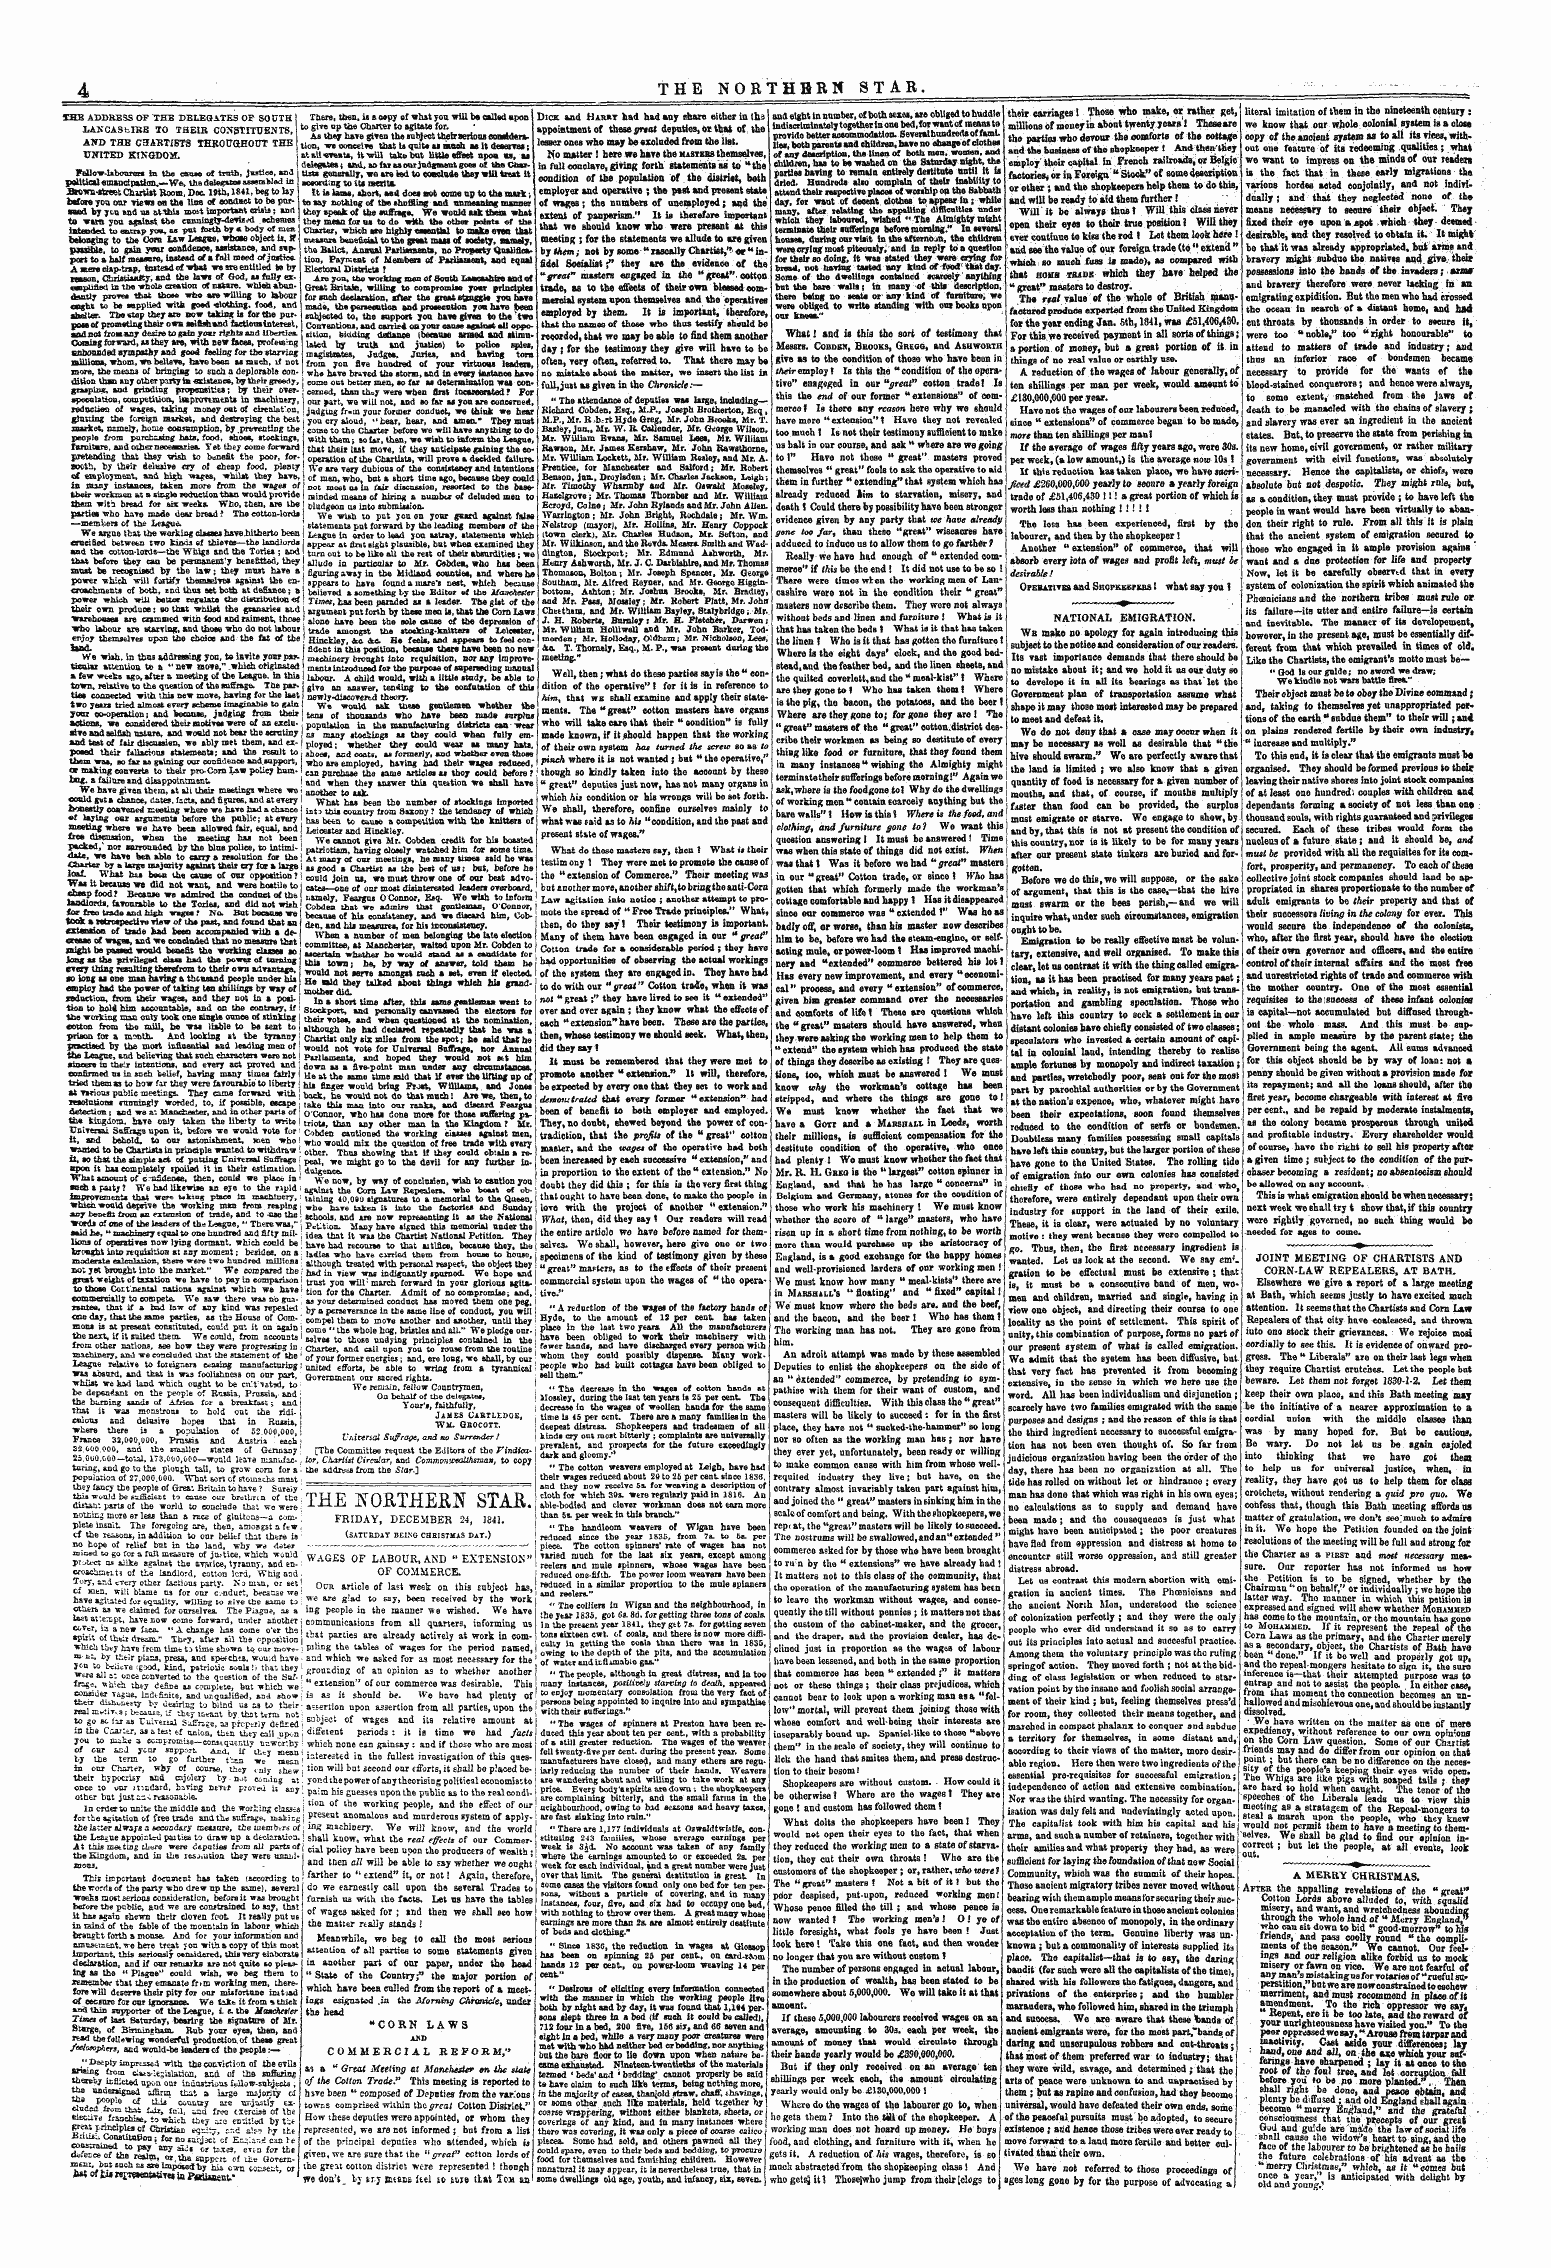 Northern Star (1837-1852): jS F Y, 1st edition - The ]\ 0rthebh Stae Friday, December 24, 1841. (Saturday Being Chhistmas Dat.)